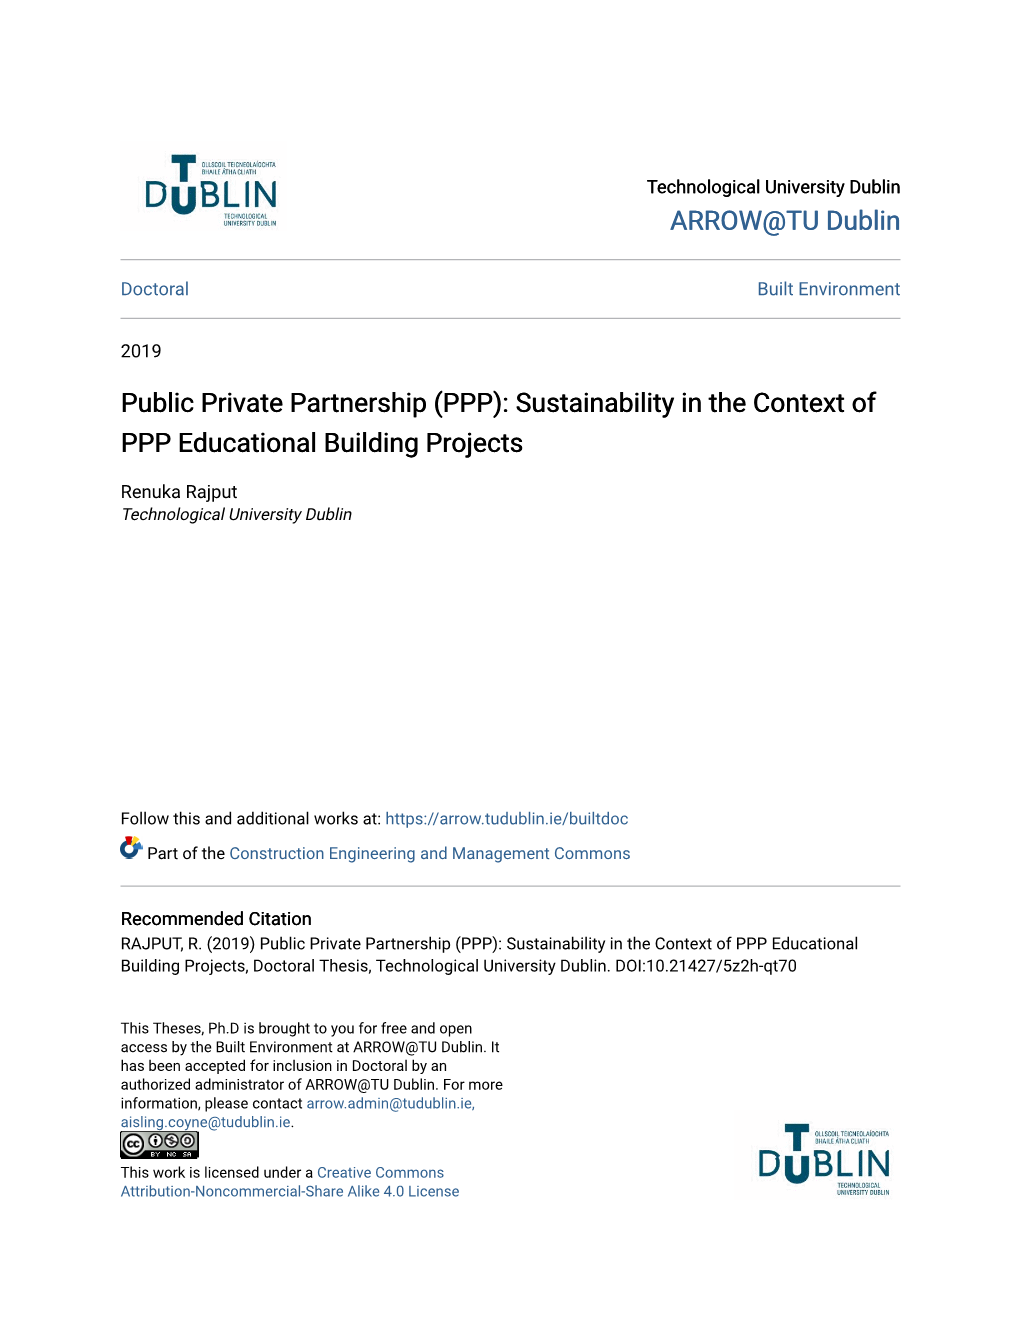 Public Private Partnership (PPP): Sustainability in the Context of PPP Educational Building Projects